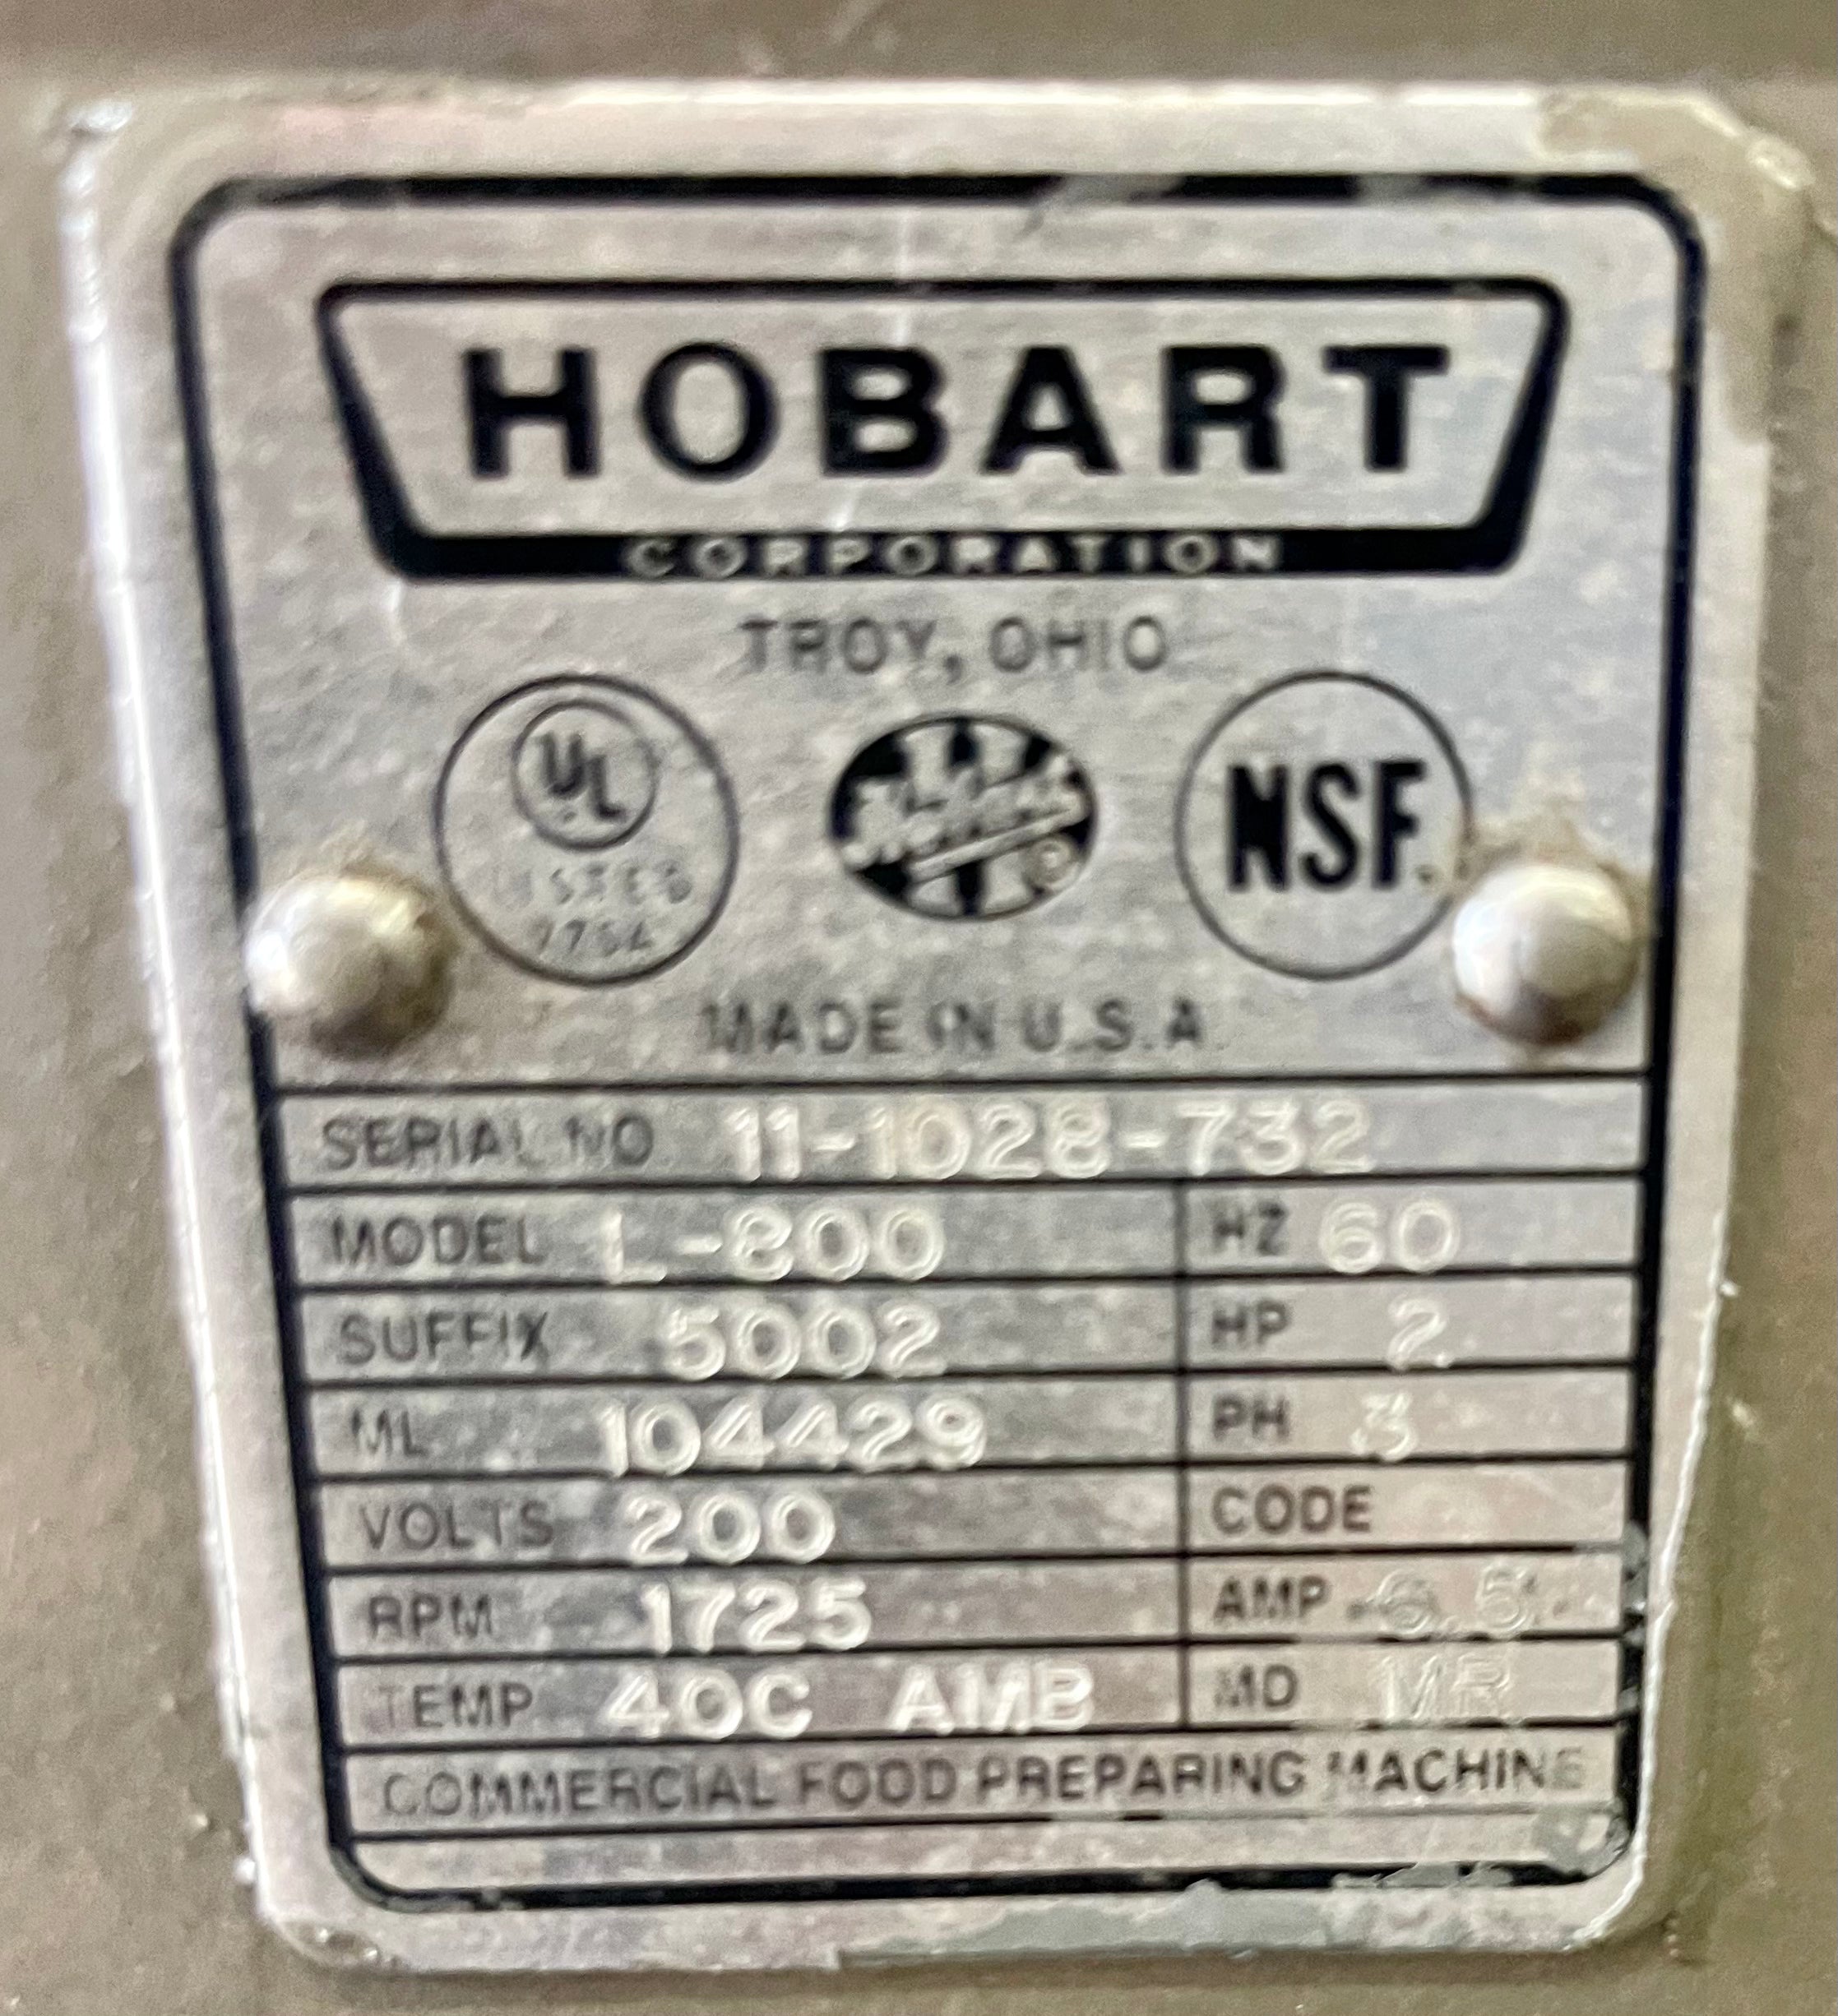 Hobart L800 3 phase 2HP Bowlguard mixer. Can be sold with 60 qt reducer ring for additional fee